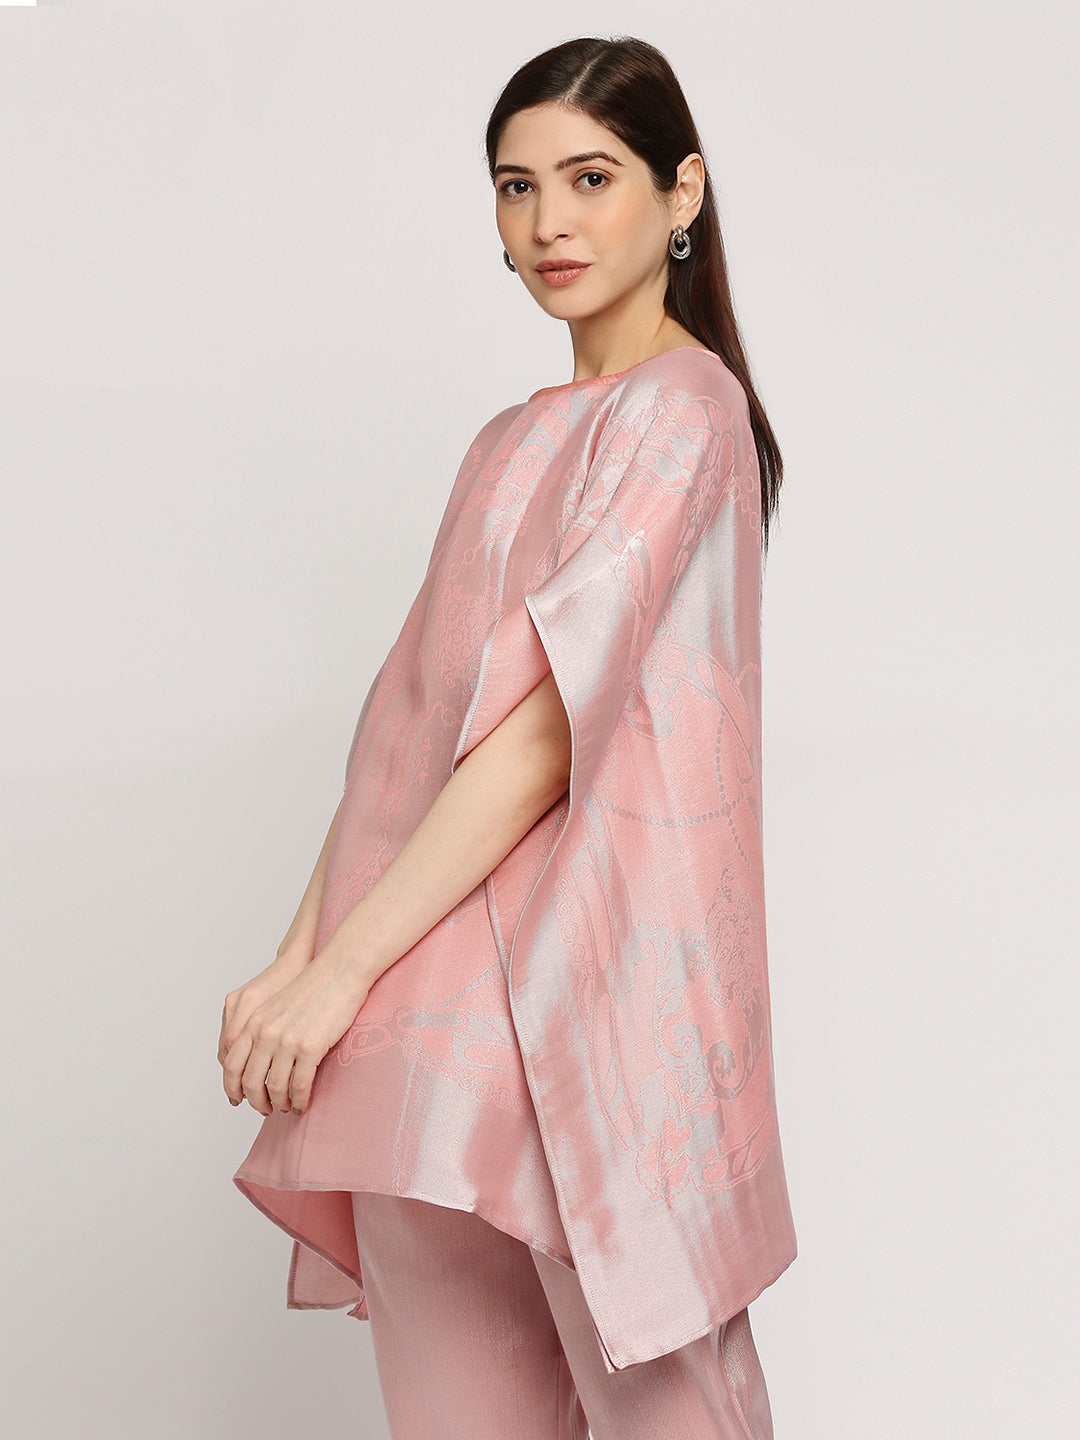 French Rope & Chains Patterned Peach Brocade short Kaftan